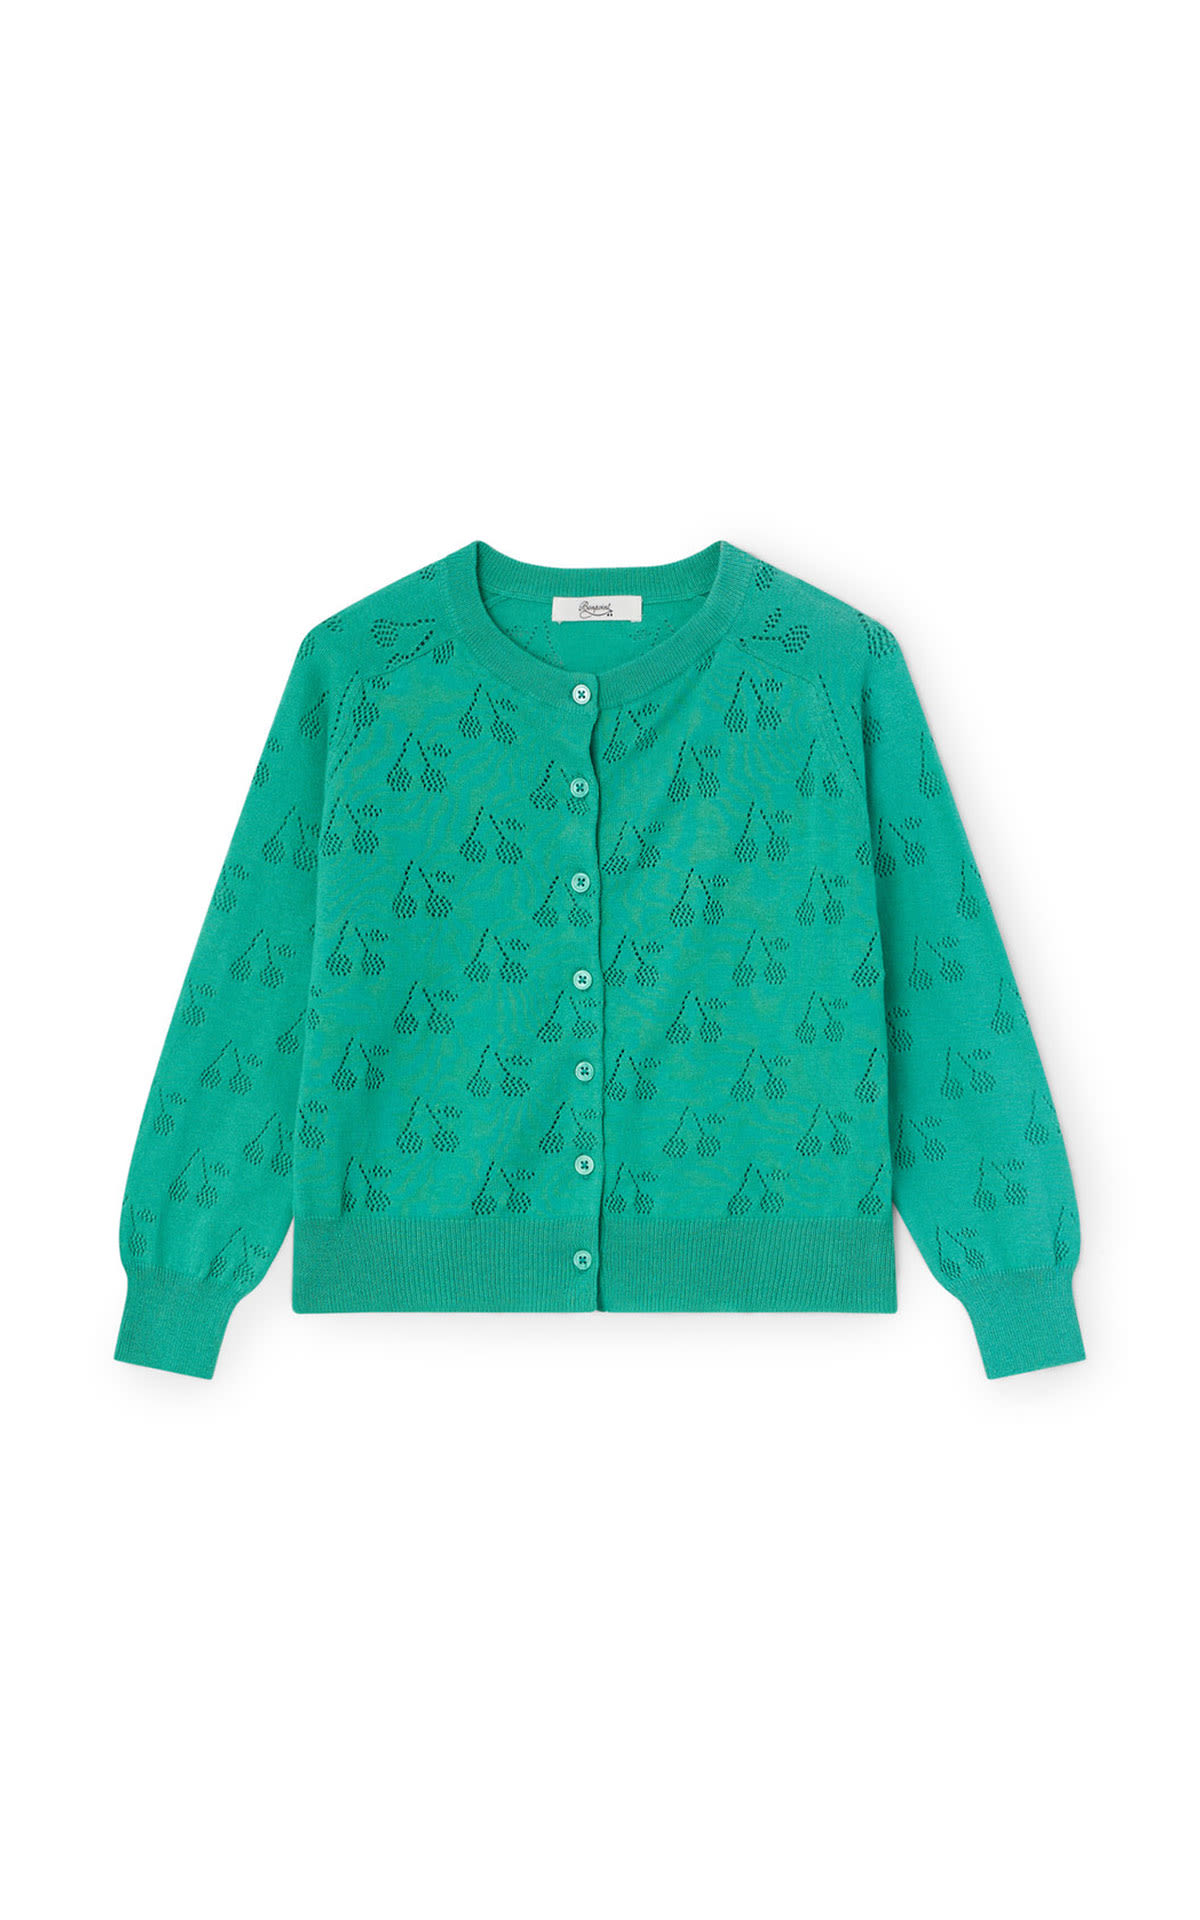 Bonpoint Girl's cardigan from Bicester Village